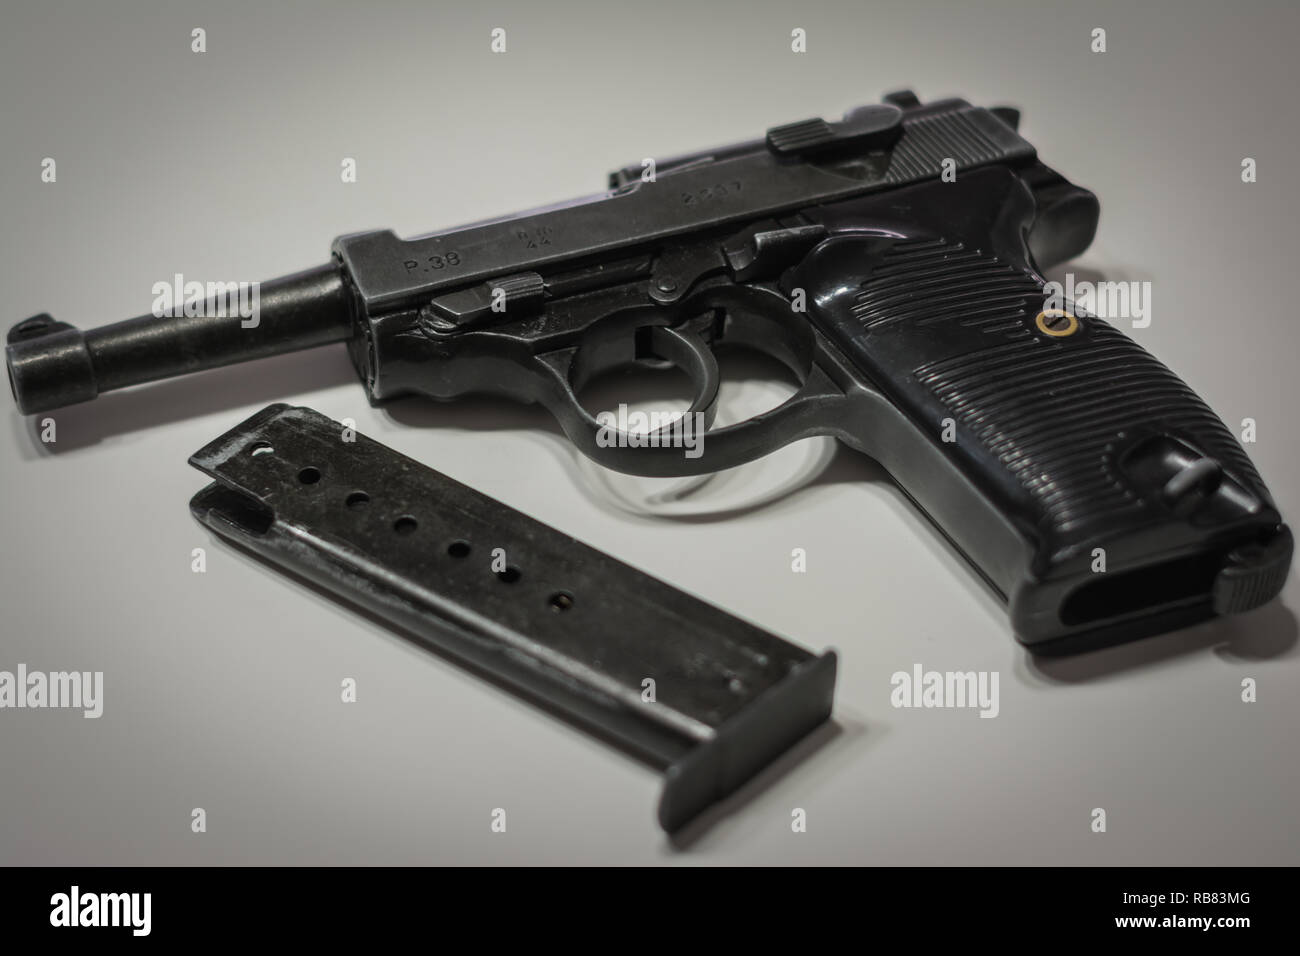 the nazi germany military automatic pistol with a magazine. World war 2 weapon Stock Photo